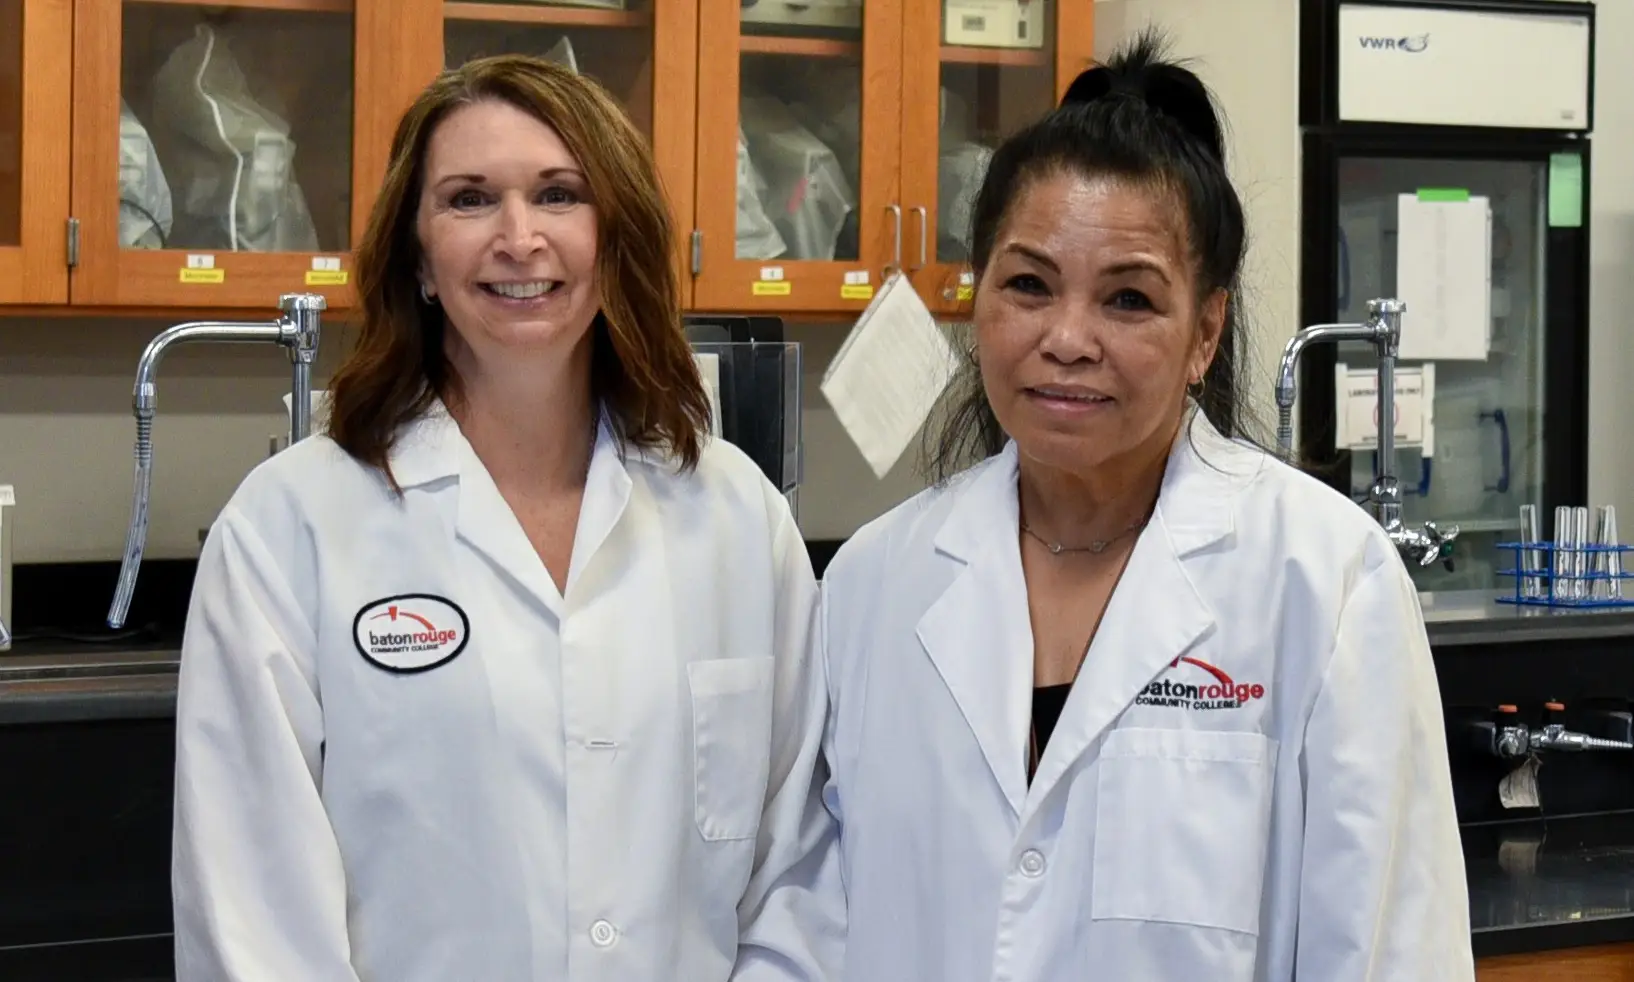 Photo of Baton Rouge Community College STEM professors who secured the National Science Foundation (NSF) grant. Pictured (l to r) Dr. Mary Miller, BRCC Professor of Biology and Science Research Program Director and Dr. Divina Miranda, BRCC Professor of Chemistry. 